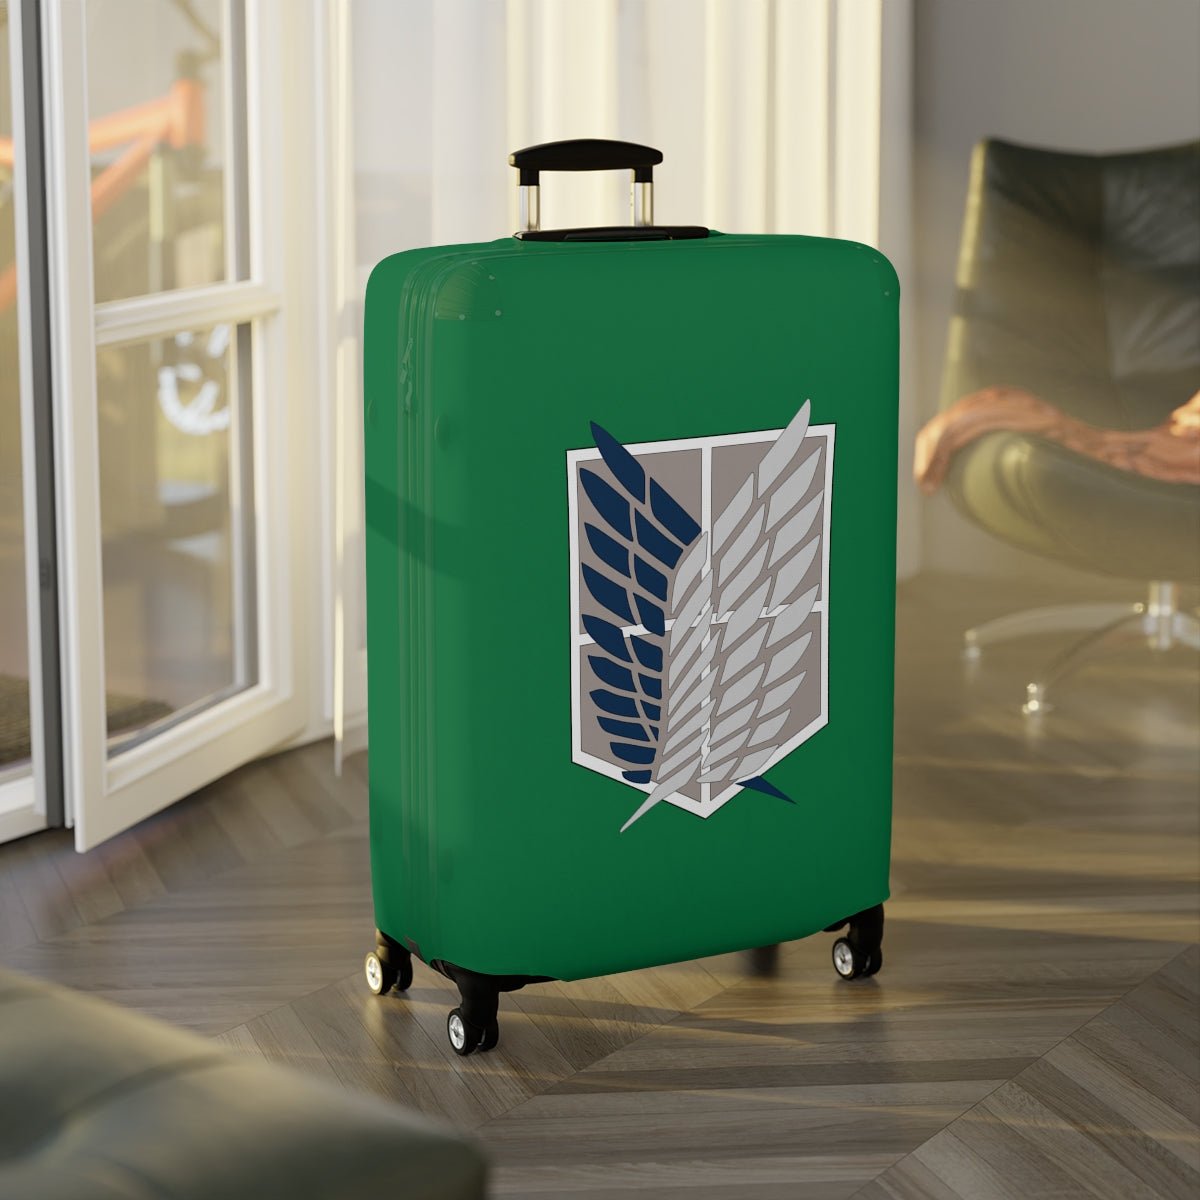 Scout Regiment Attack on Titan Anime Suitcase Luggage Cover - One Punch Fits